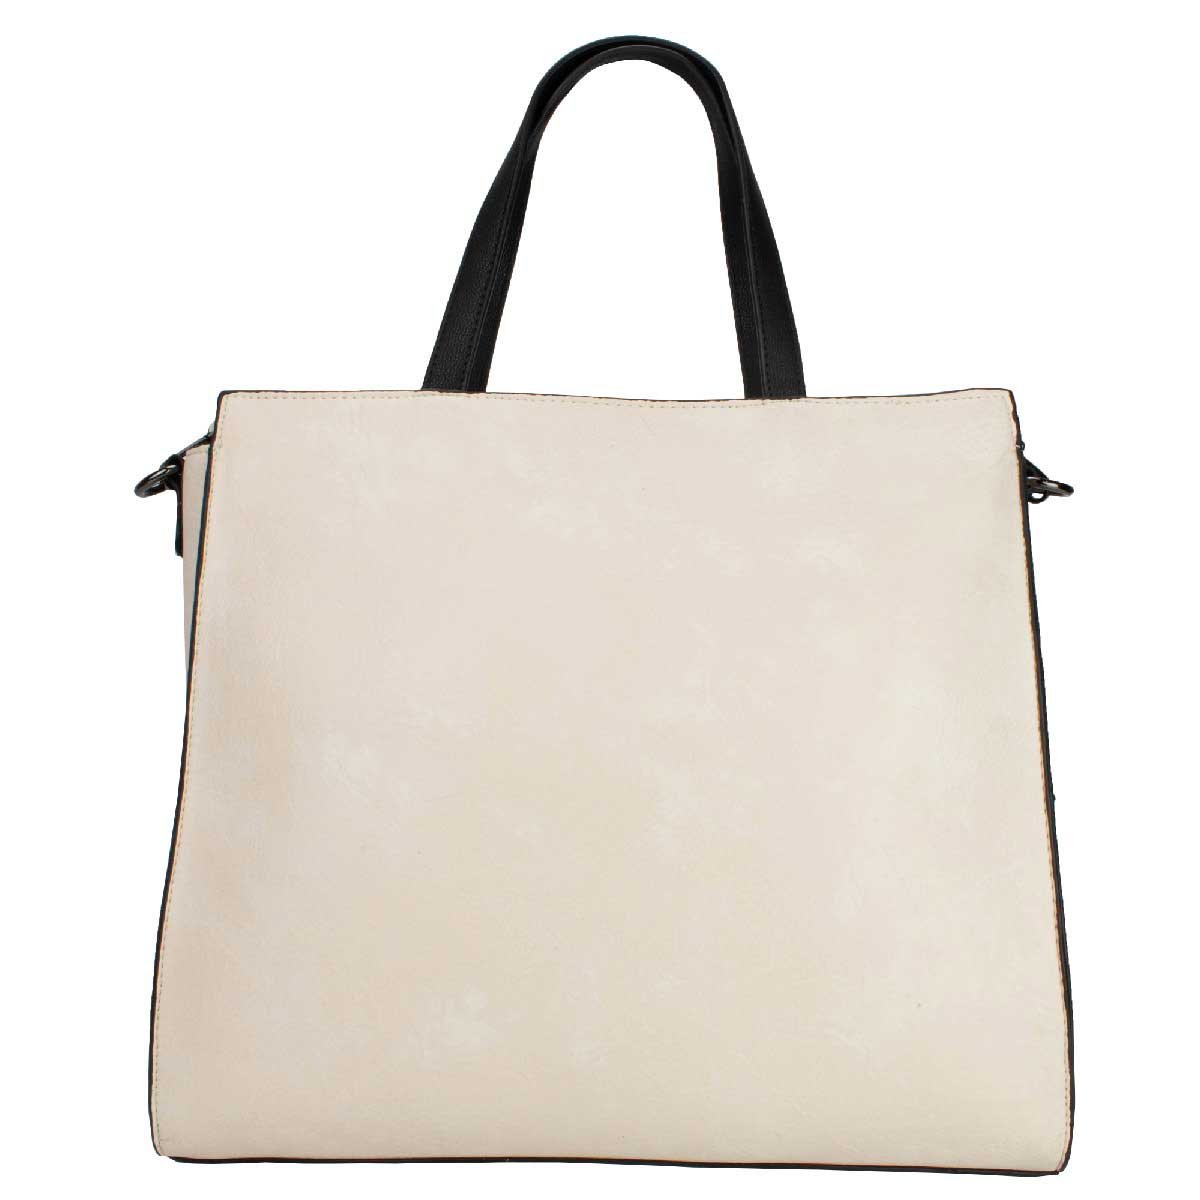 Bolso Tote Gris Lee